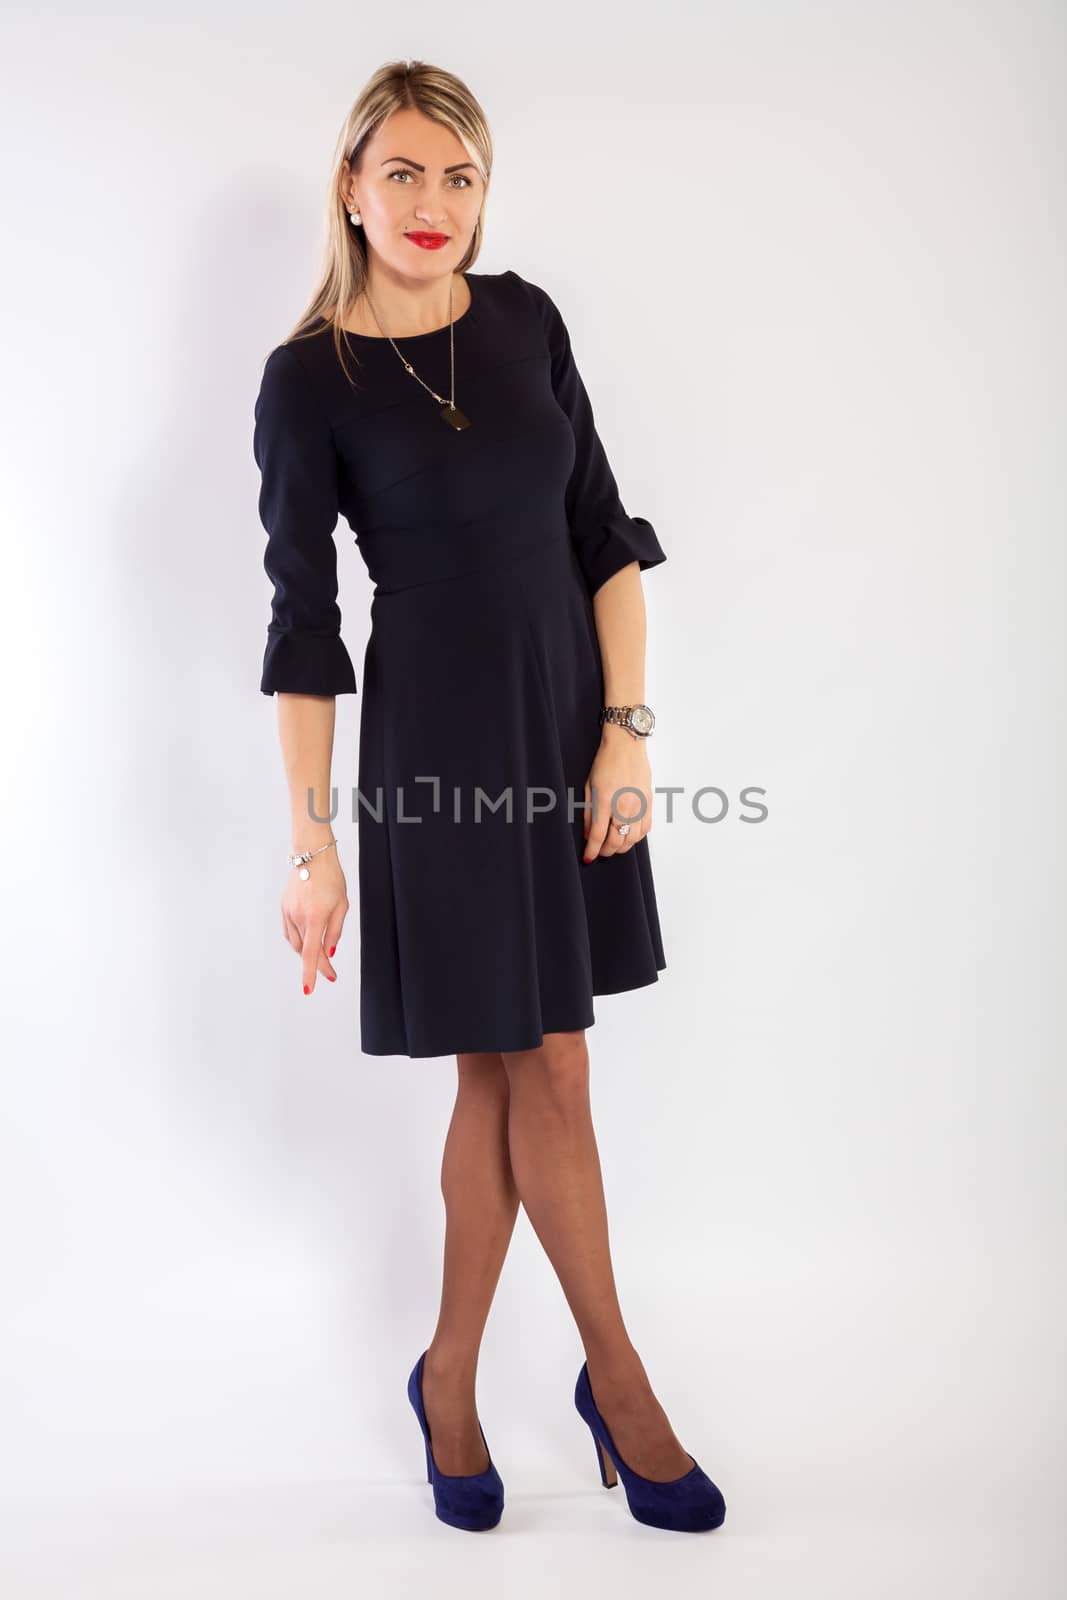 Young woman in a black dress is standing and posing by 25ehaag6